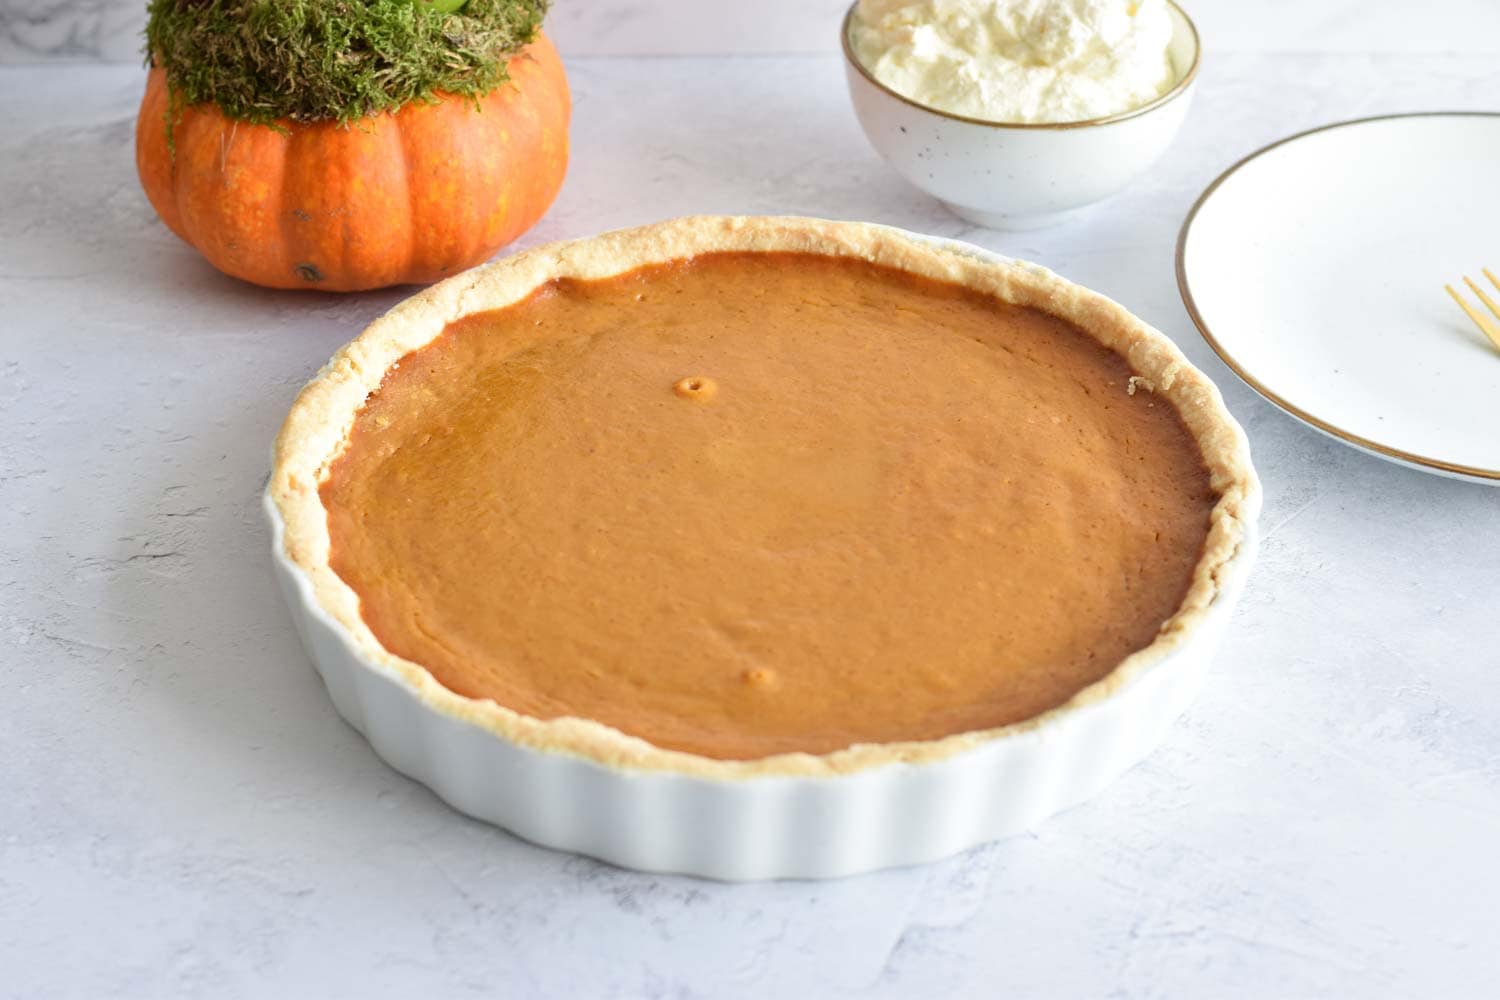 Low FODMAP pumpkin pie with cream on the side